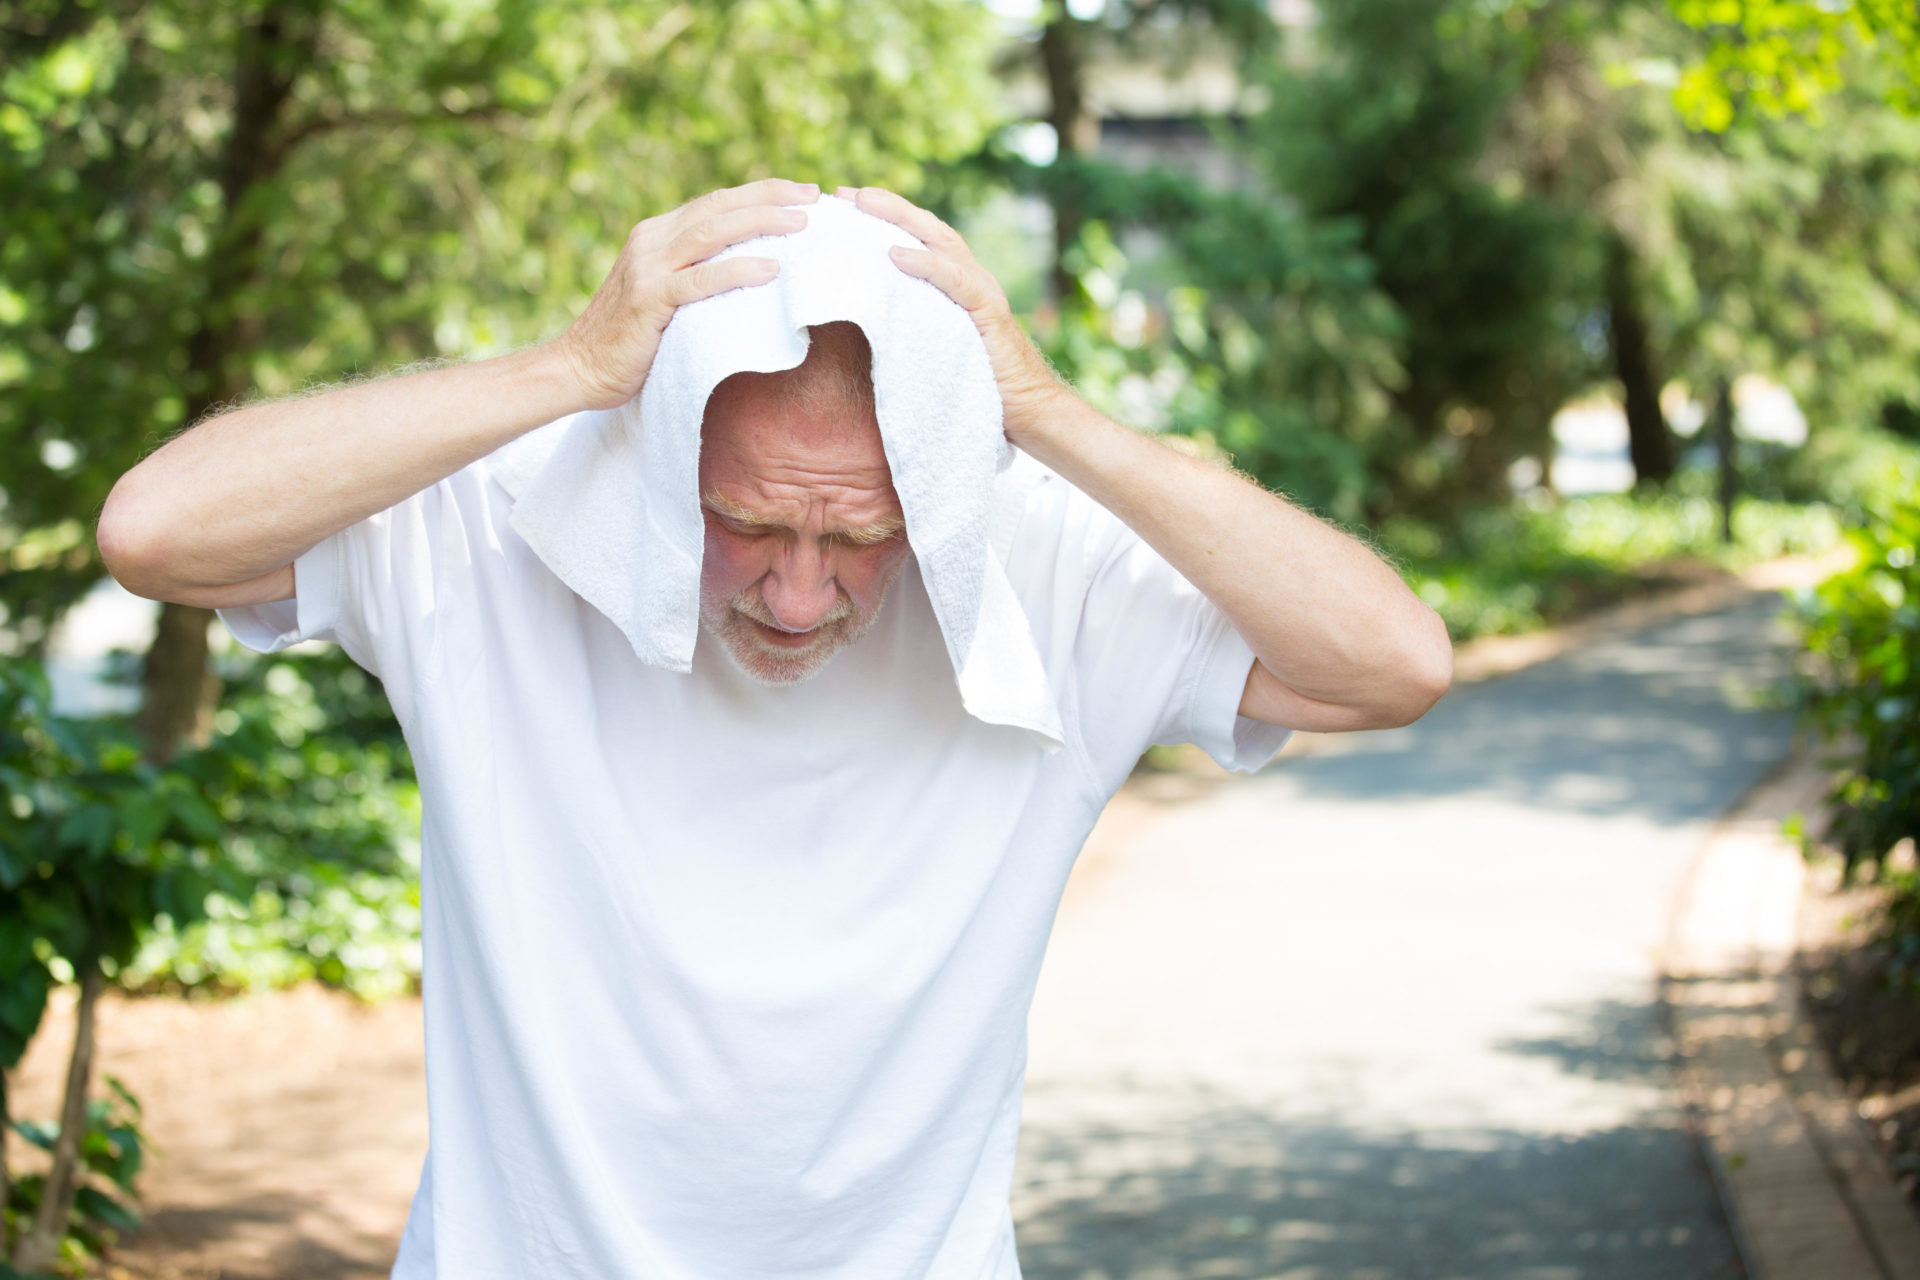 Old gentleman in white shirt having difficulties with extreme heat ( Ashok Tholpady / Alamy Stock Photo)